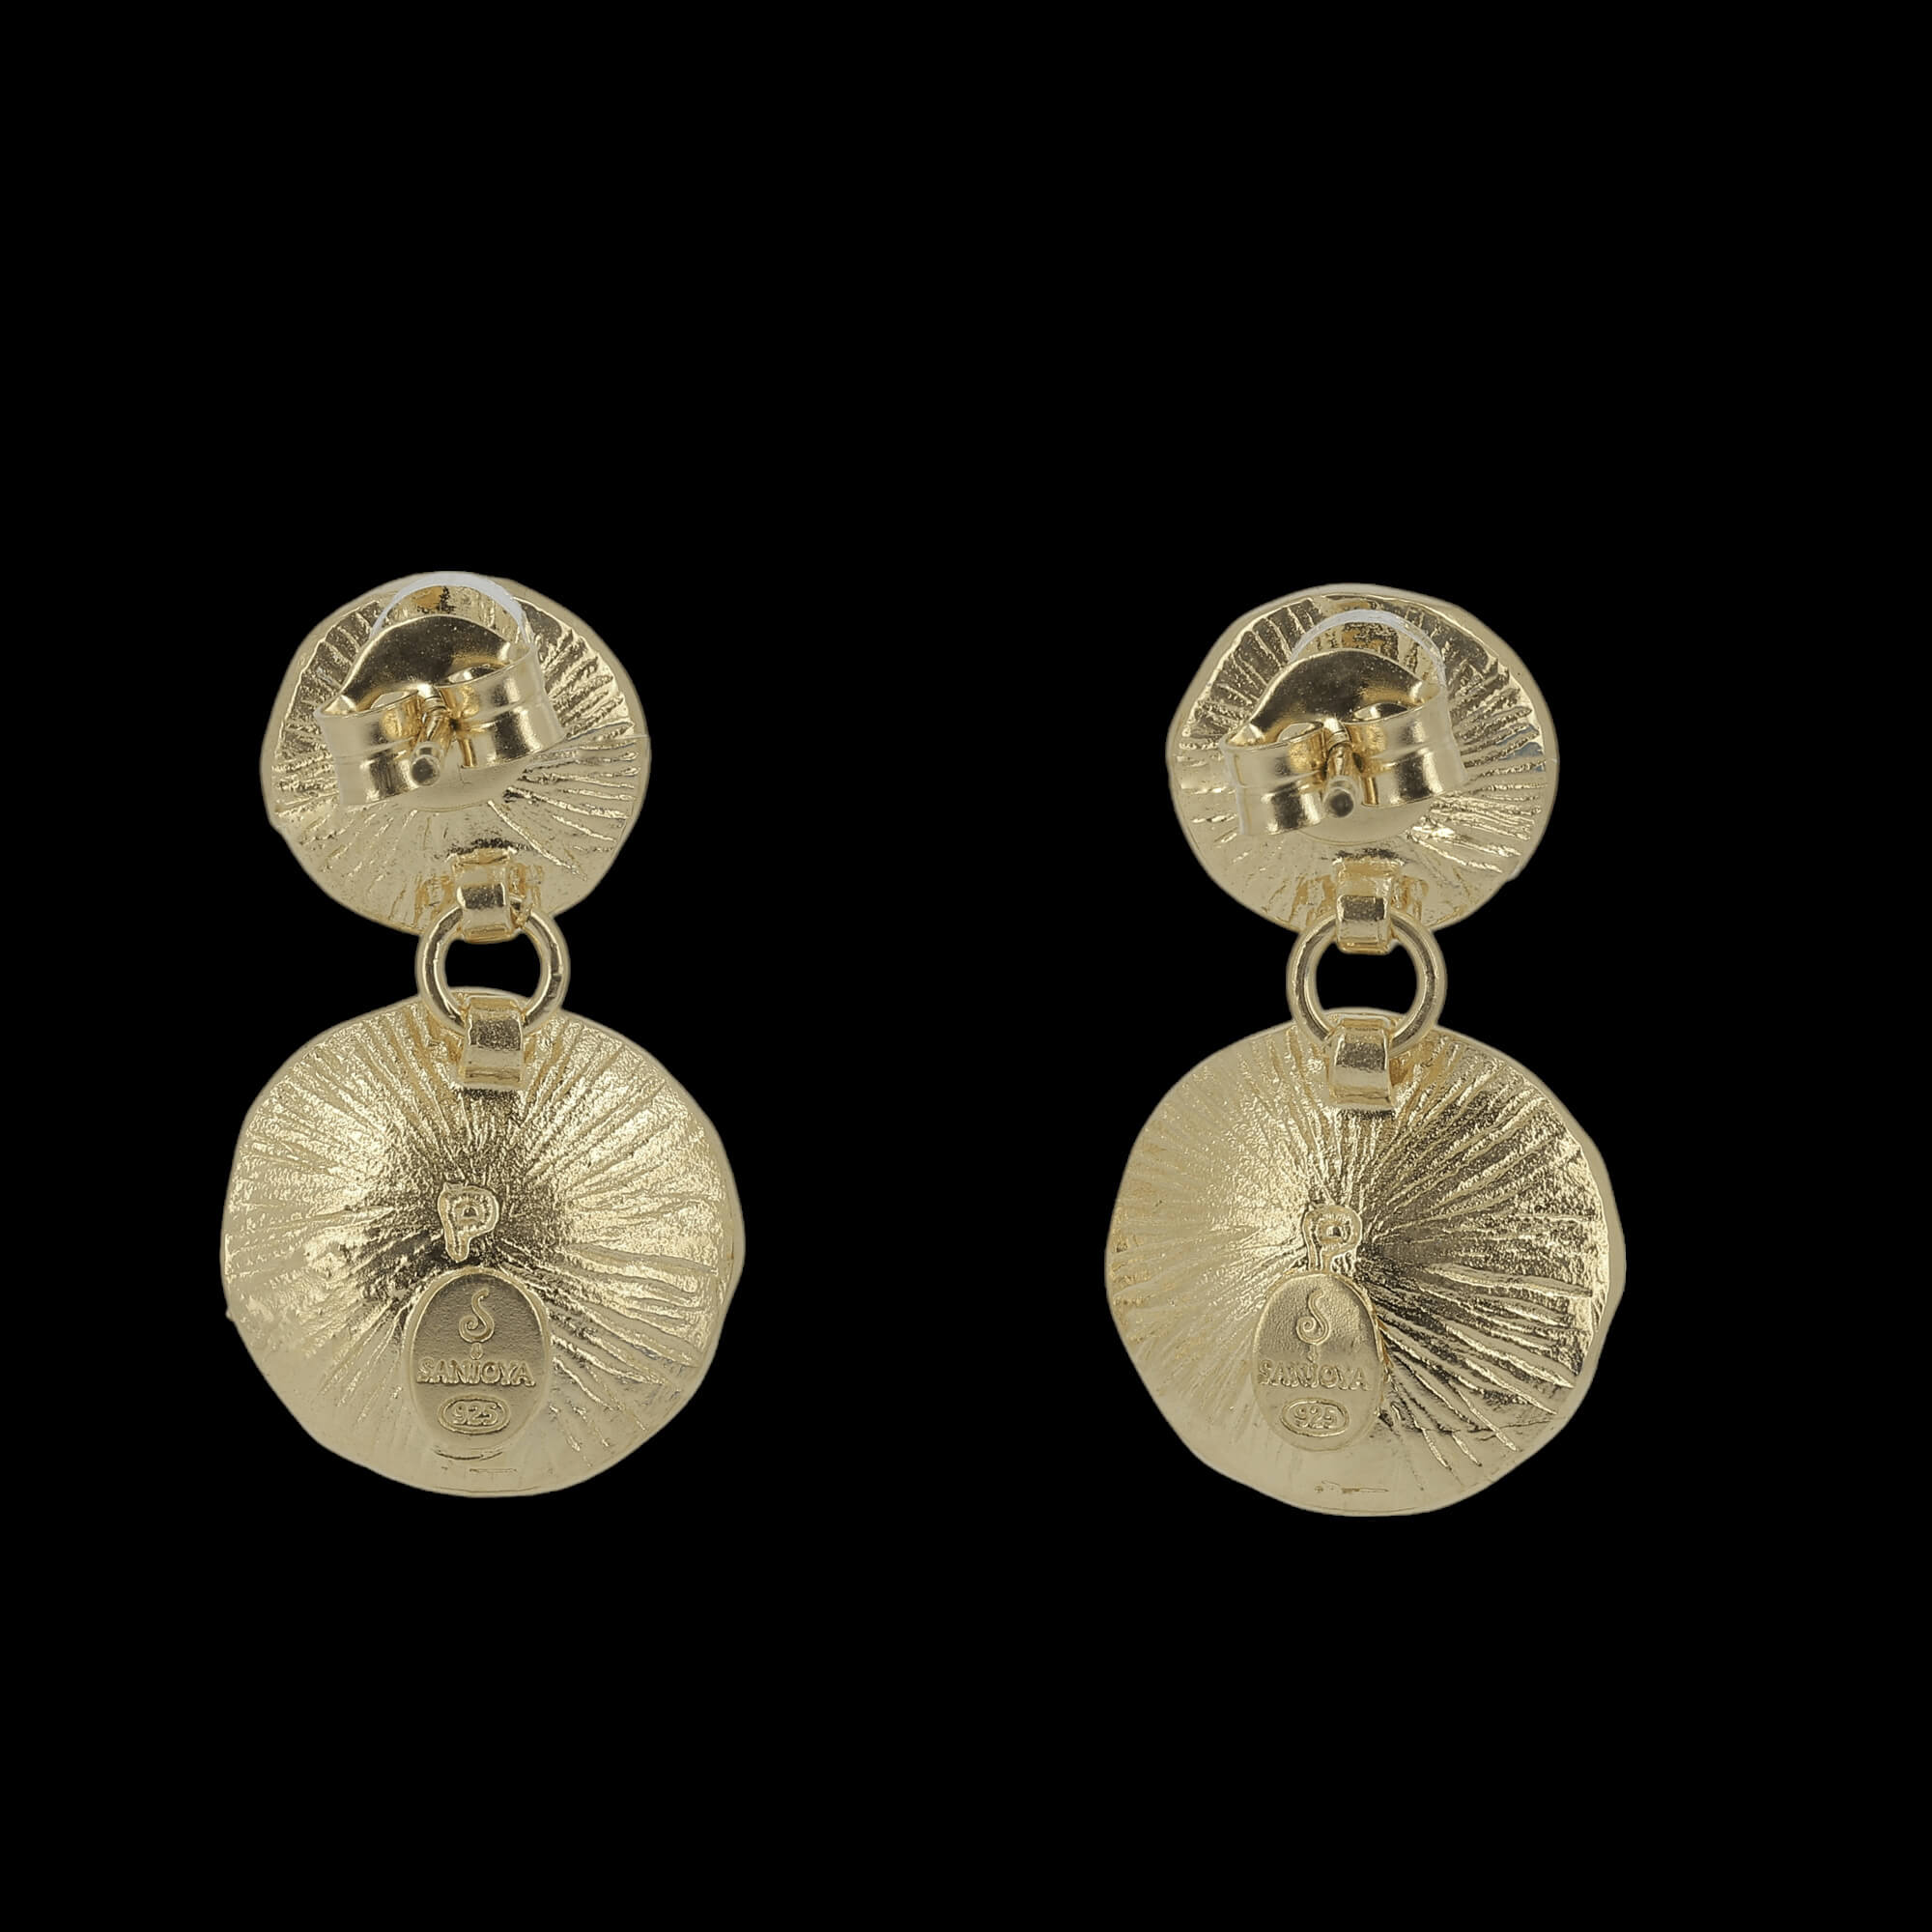 Short-hanging and gilded earrings with two gems